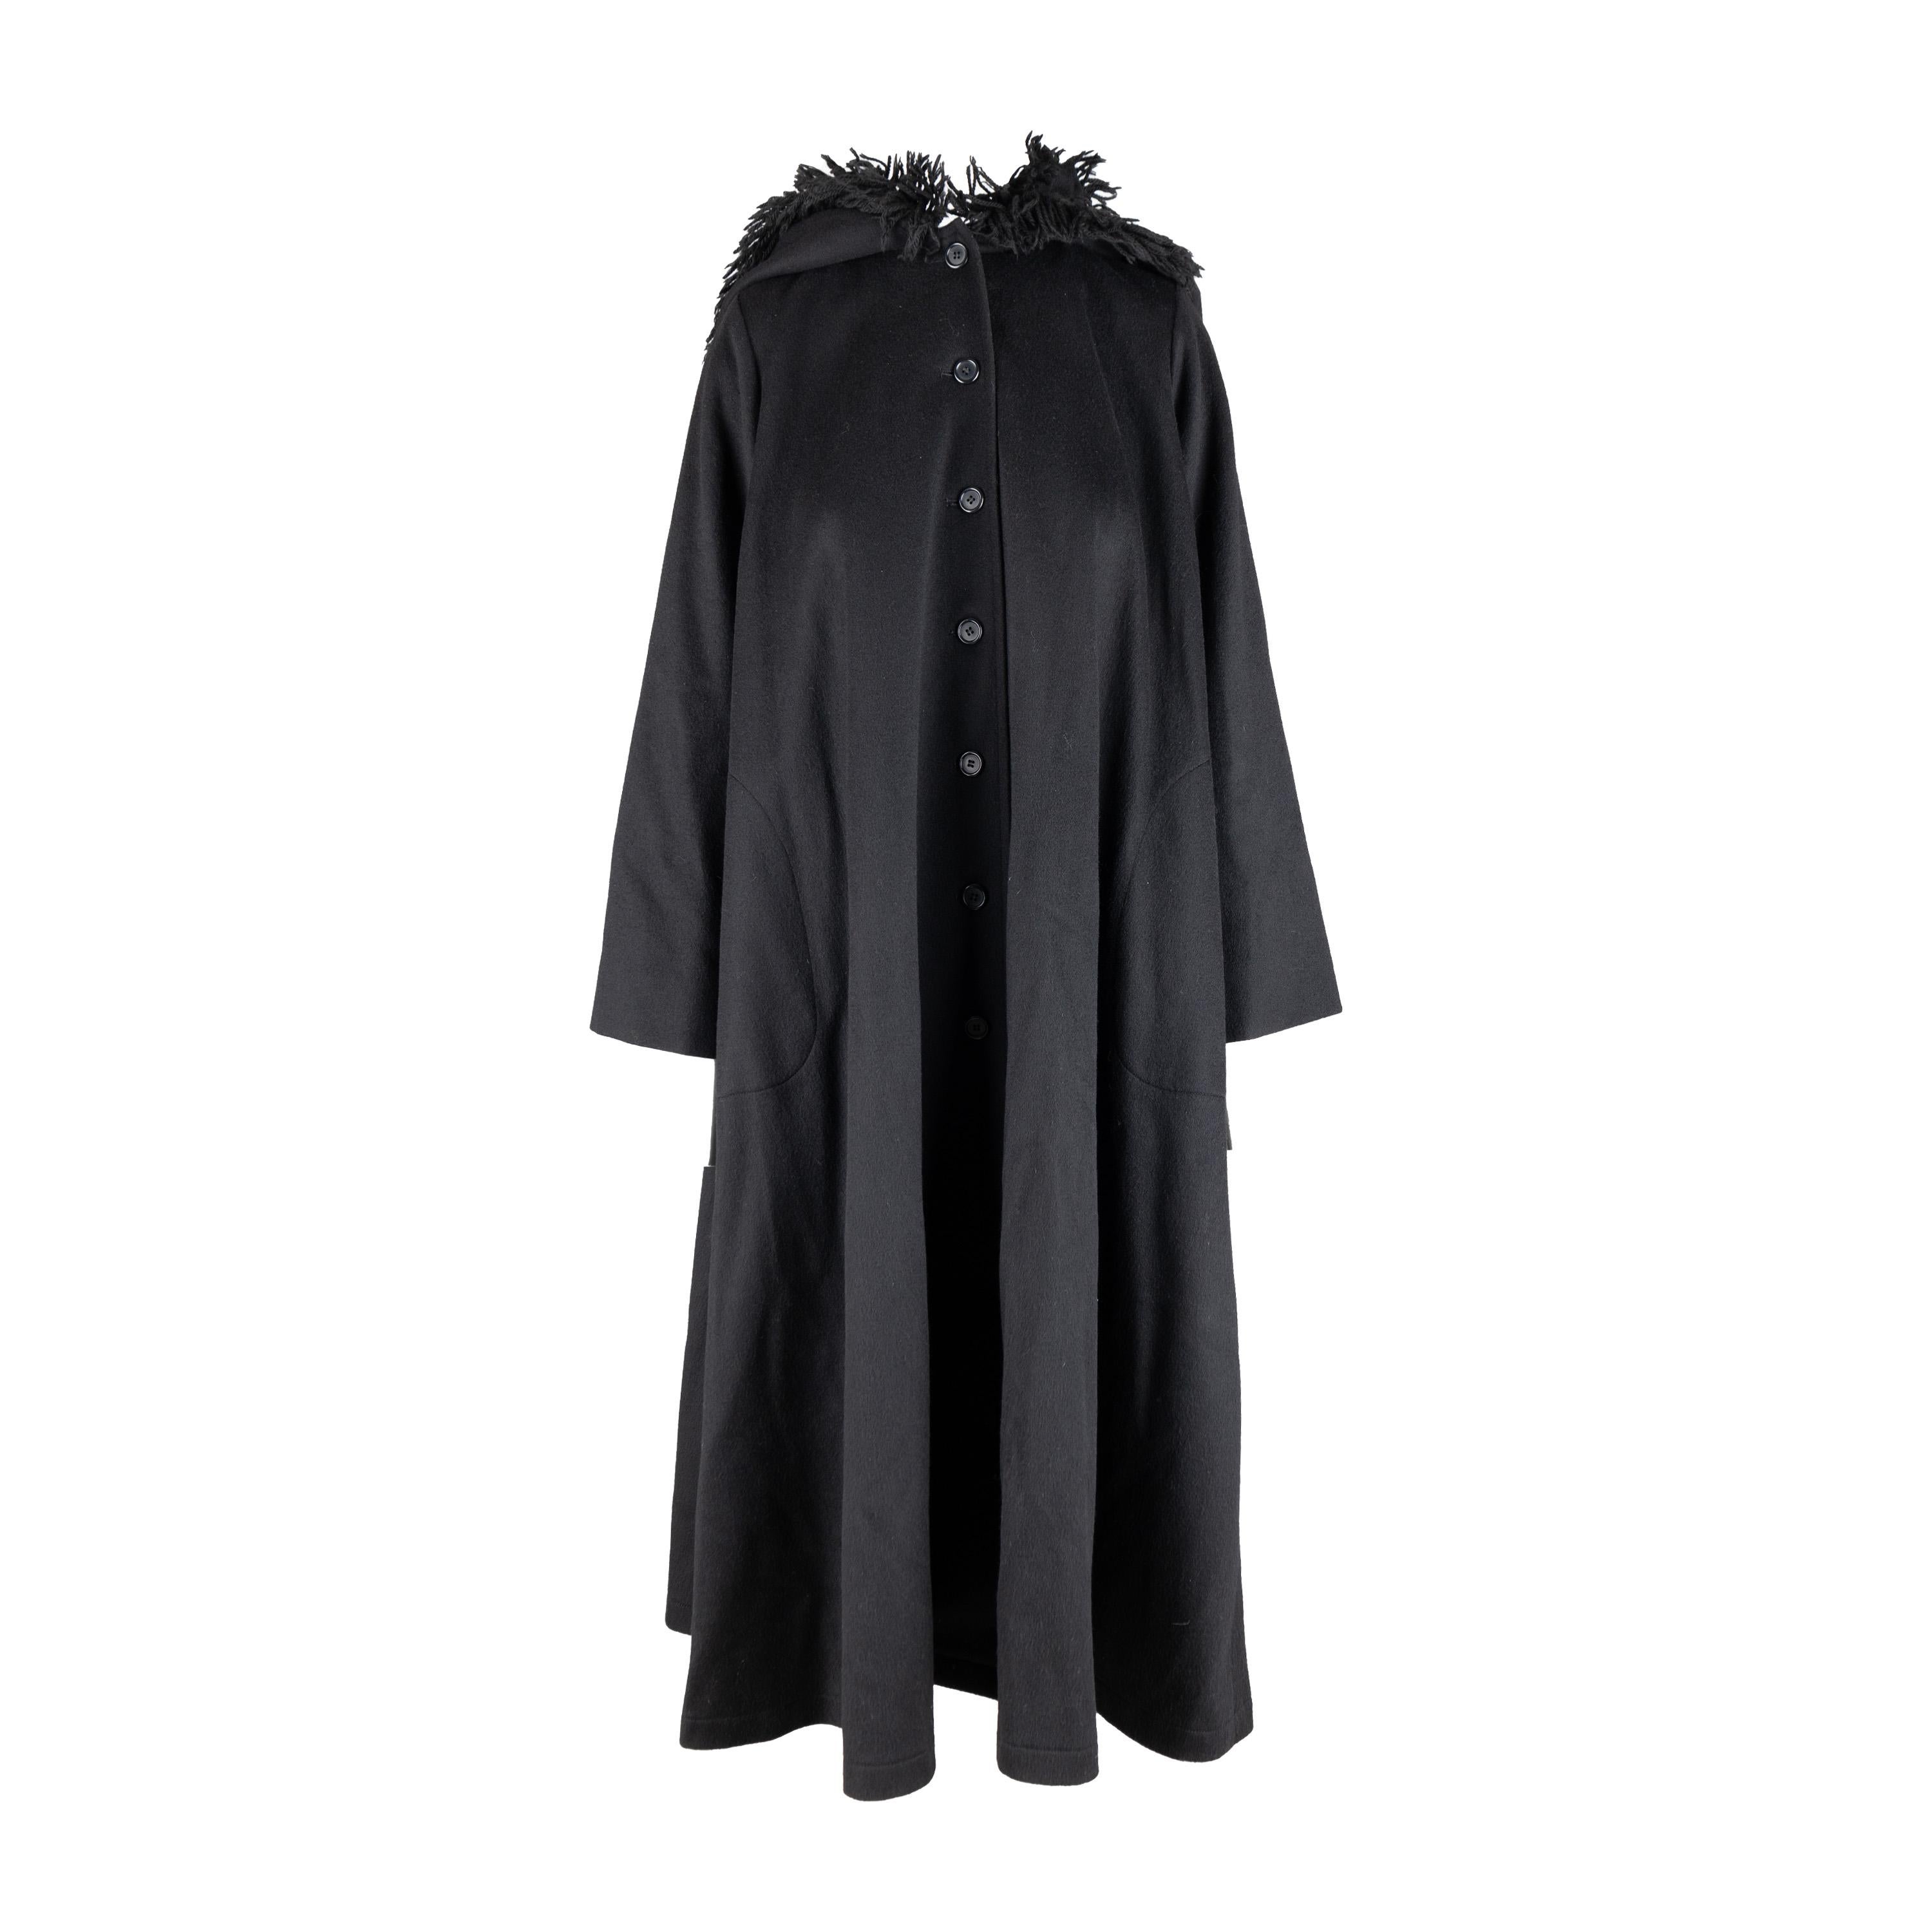 This is an iconic Yves Saint Laurent Vintage Hooded Cape Coat from the 1970's, crafted from wool. The black wool cape style coat features a hood and wool fringe trim. The coat underneath the cape has a swing silhouette with a button closure down the